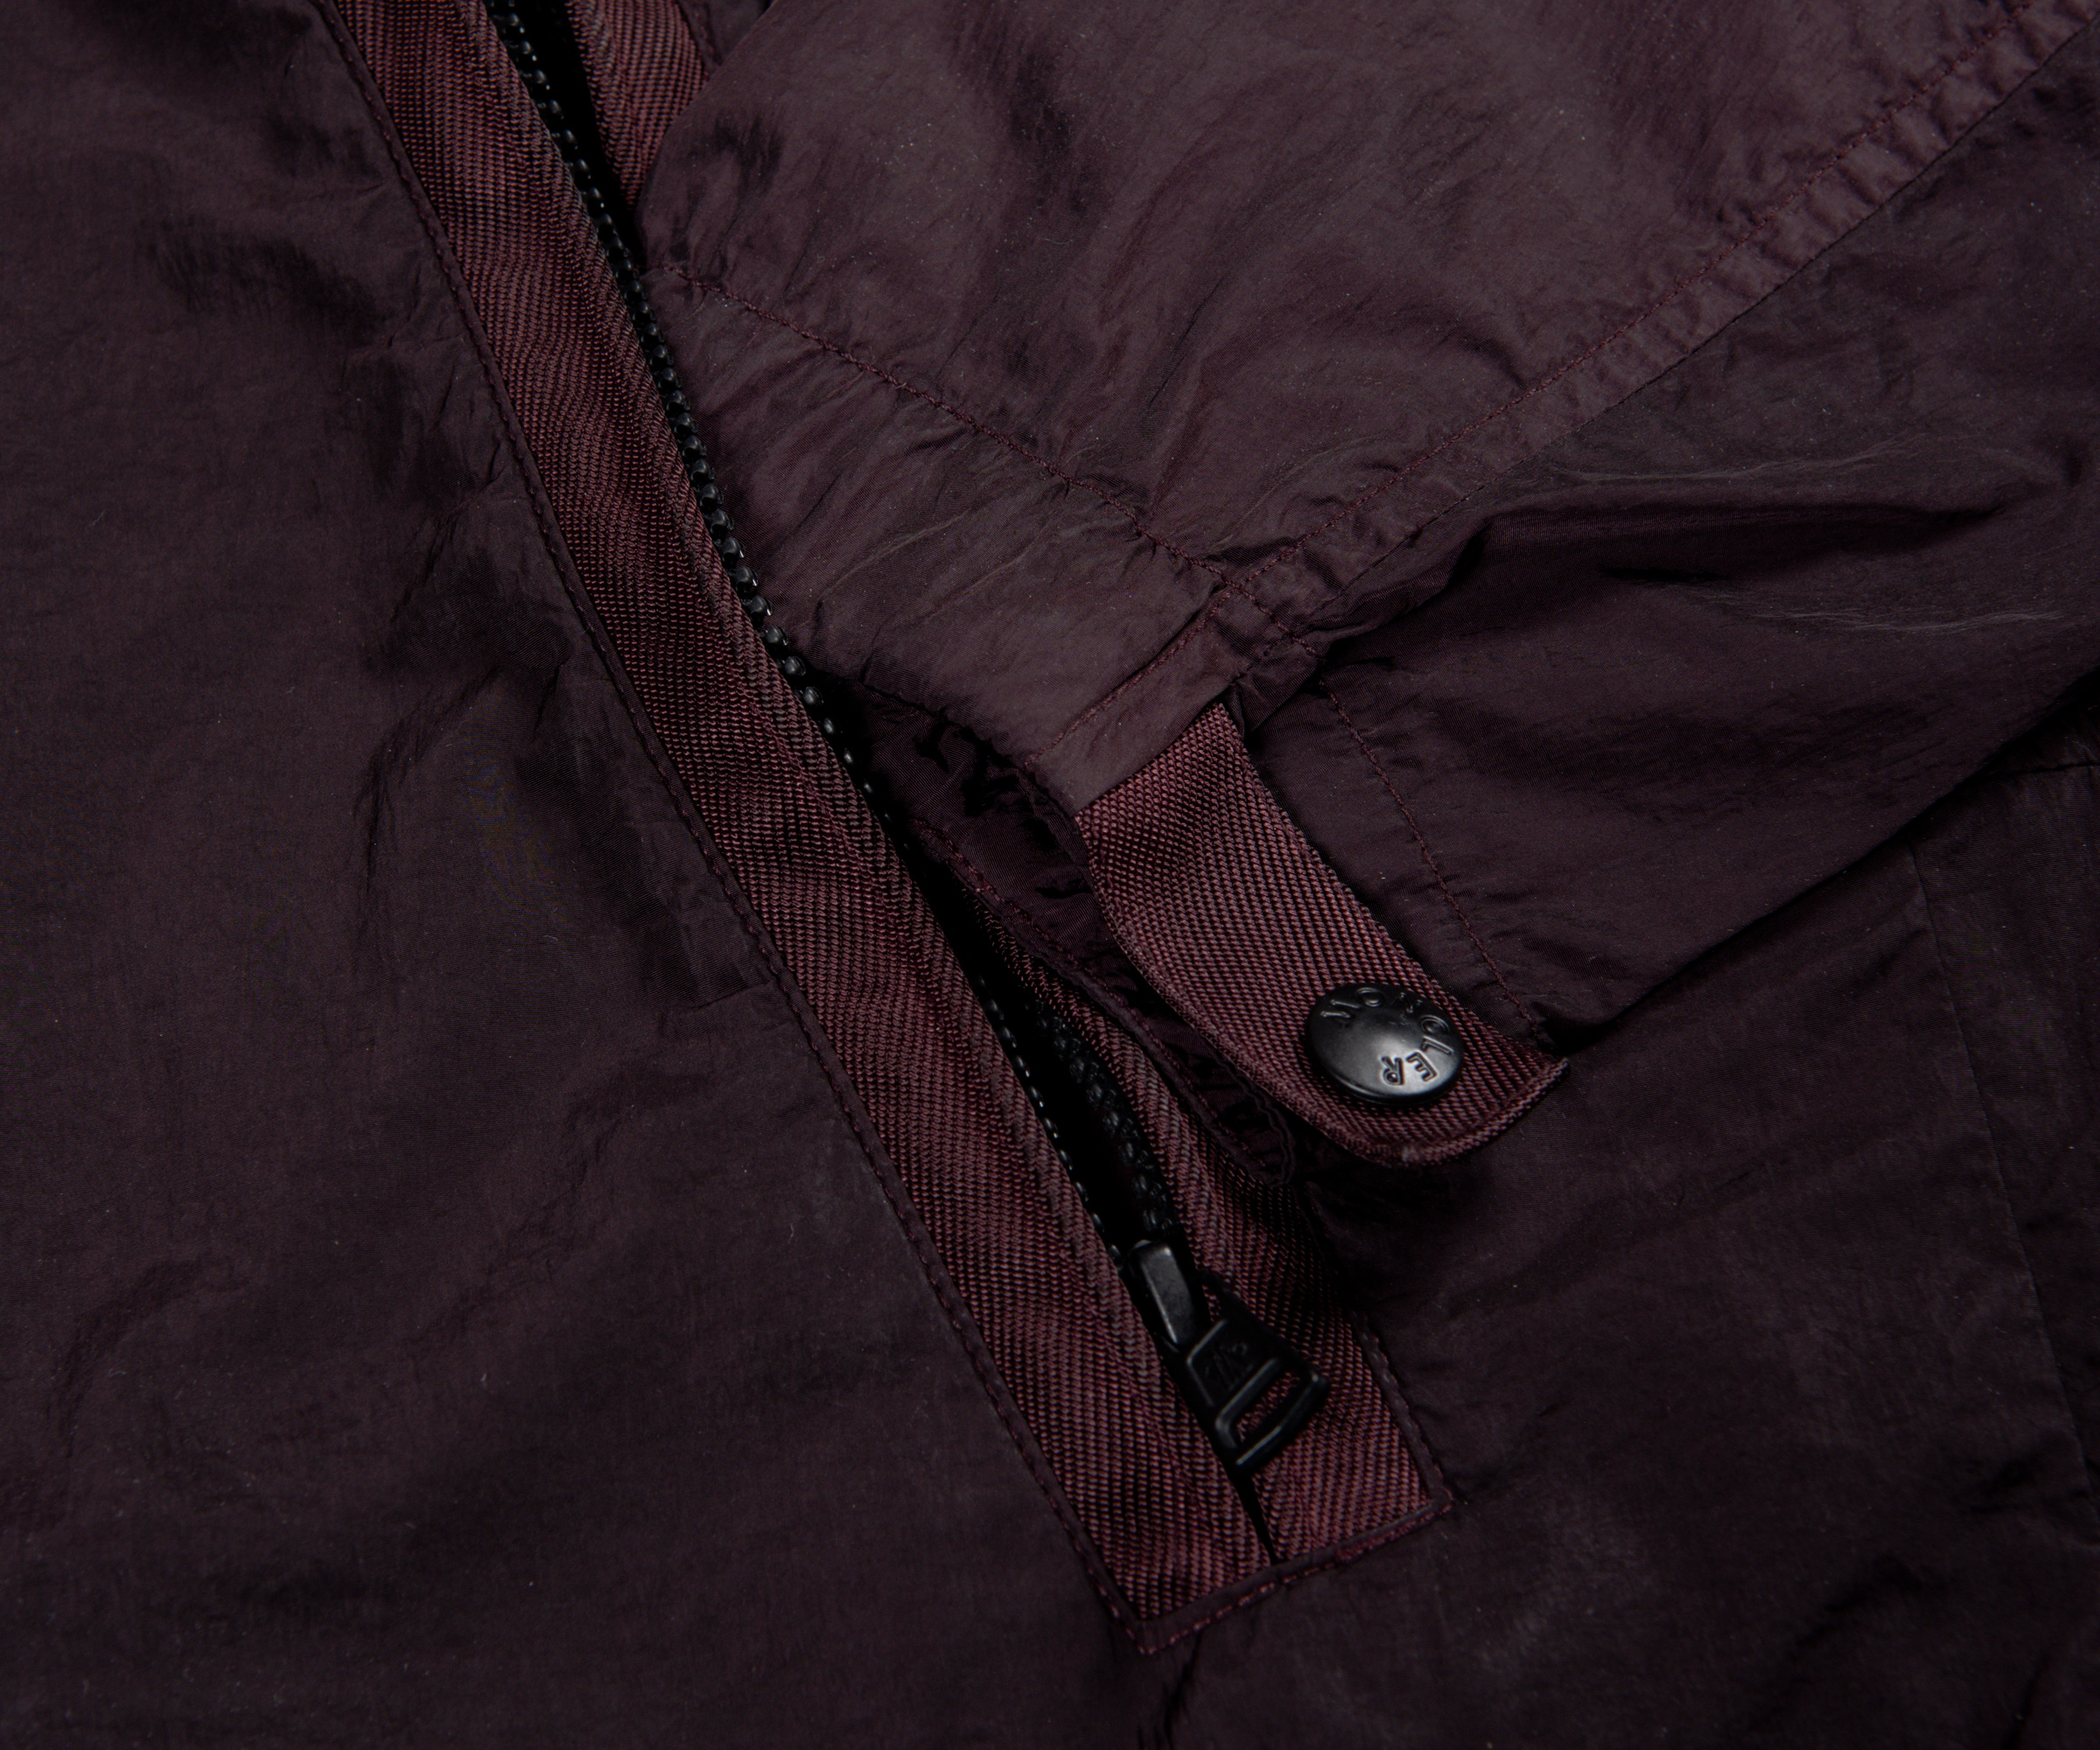 Moncler Scie Crinkle Reps Jacket With Trim Plum